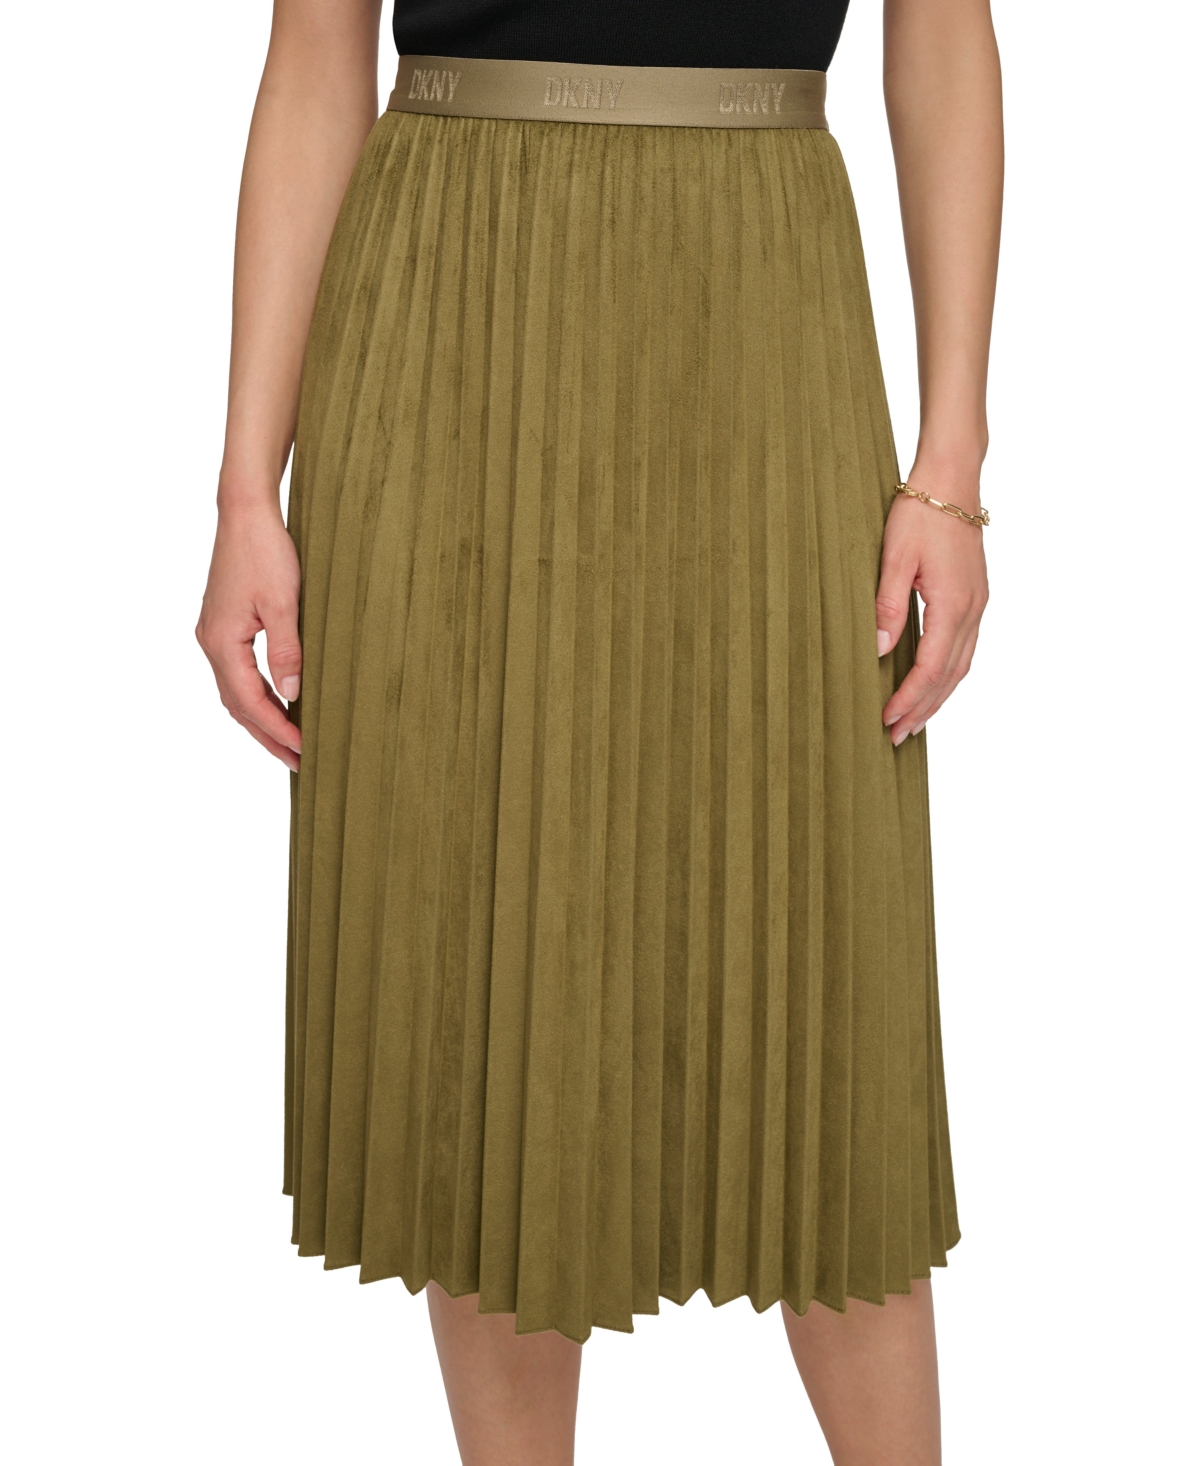 Women's Pleated Faux Suede Skirt - Light Fatigue